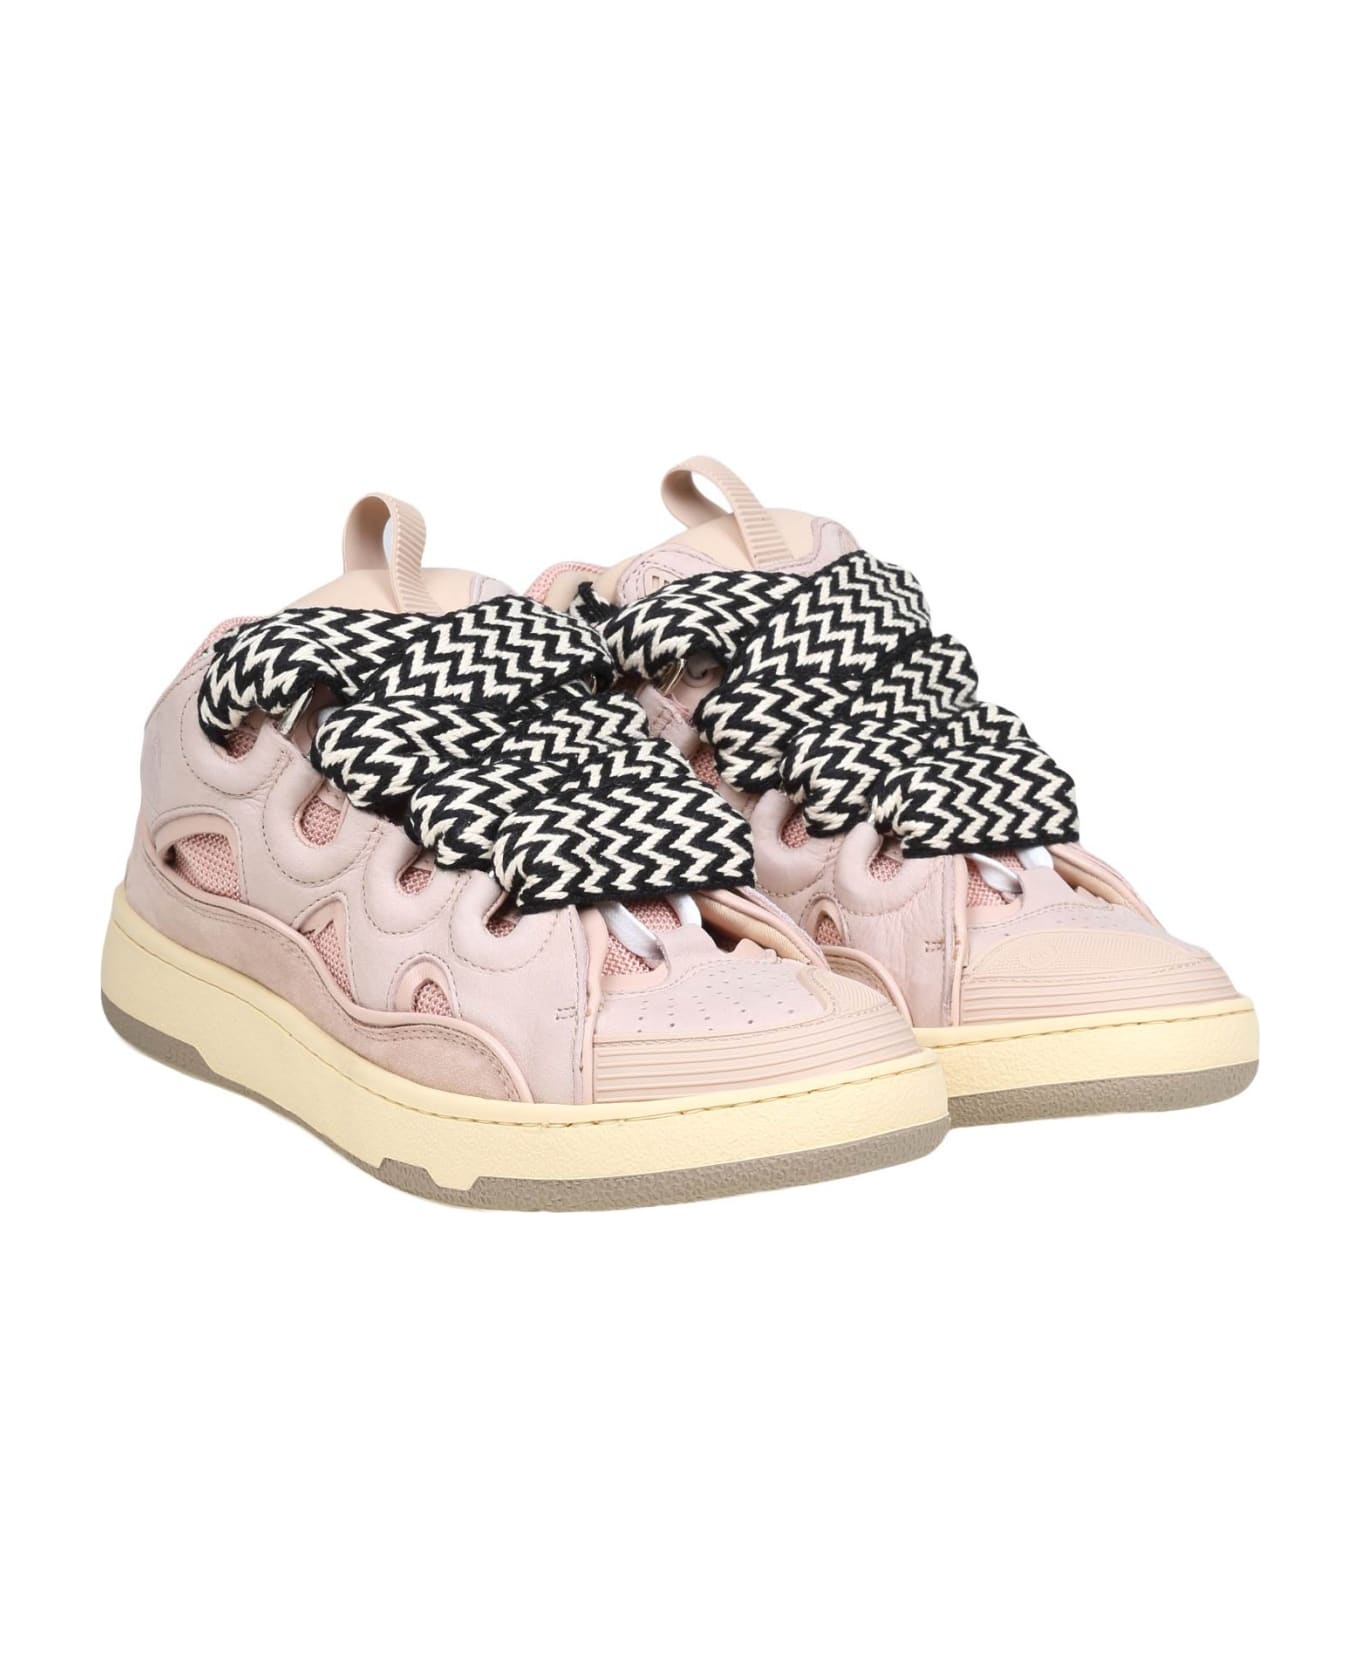 Lanvin Skate Sneakers In Pink Leather - Pink